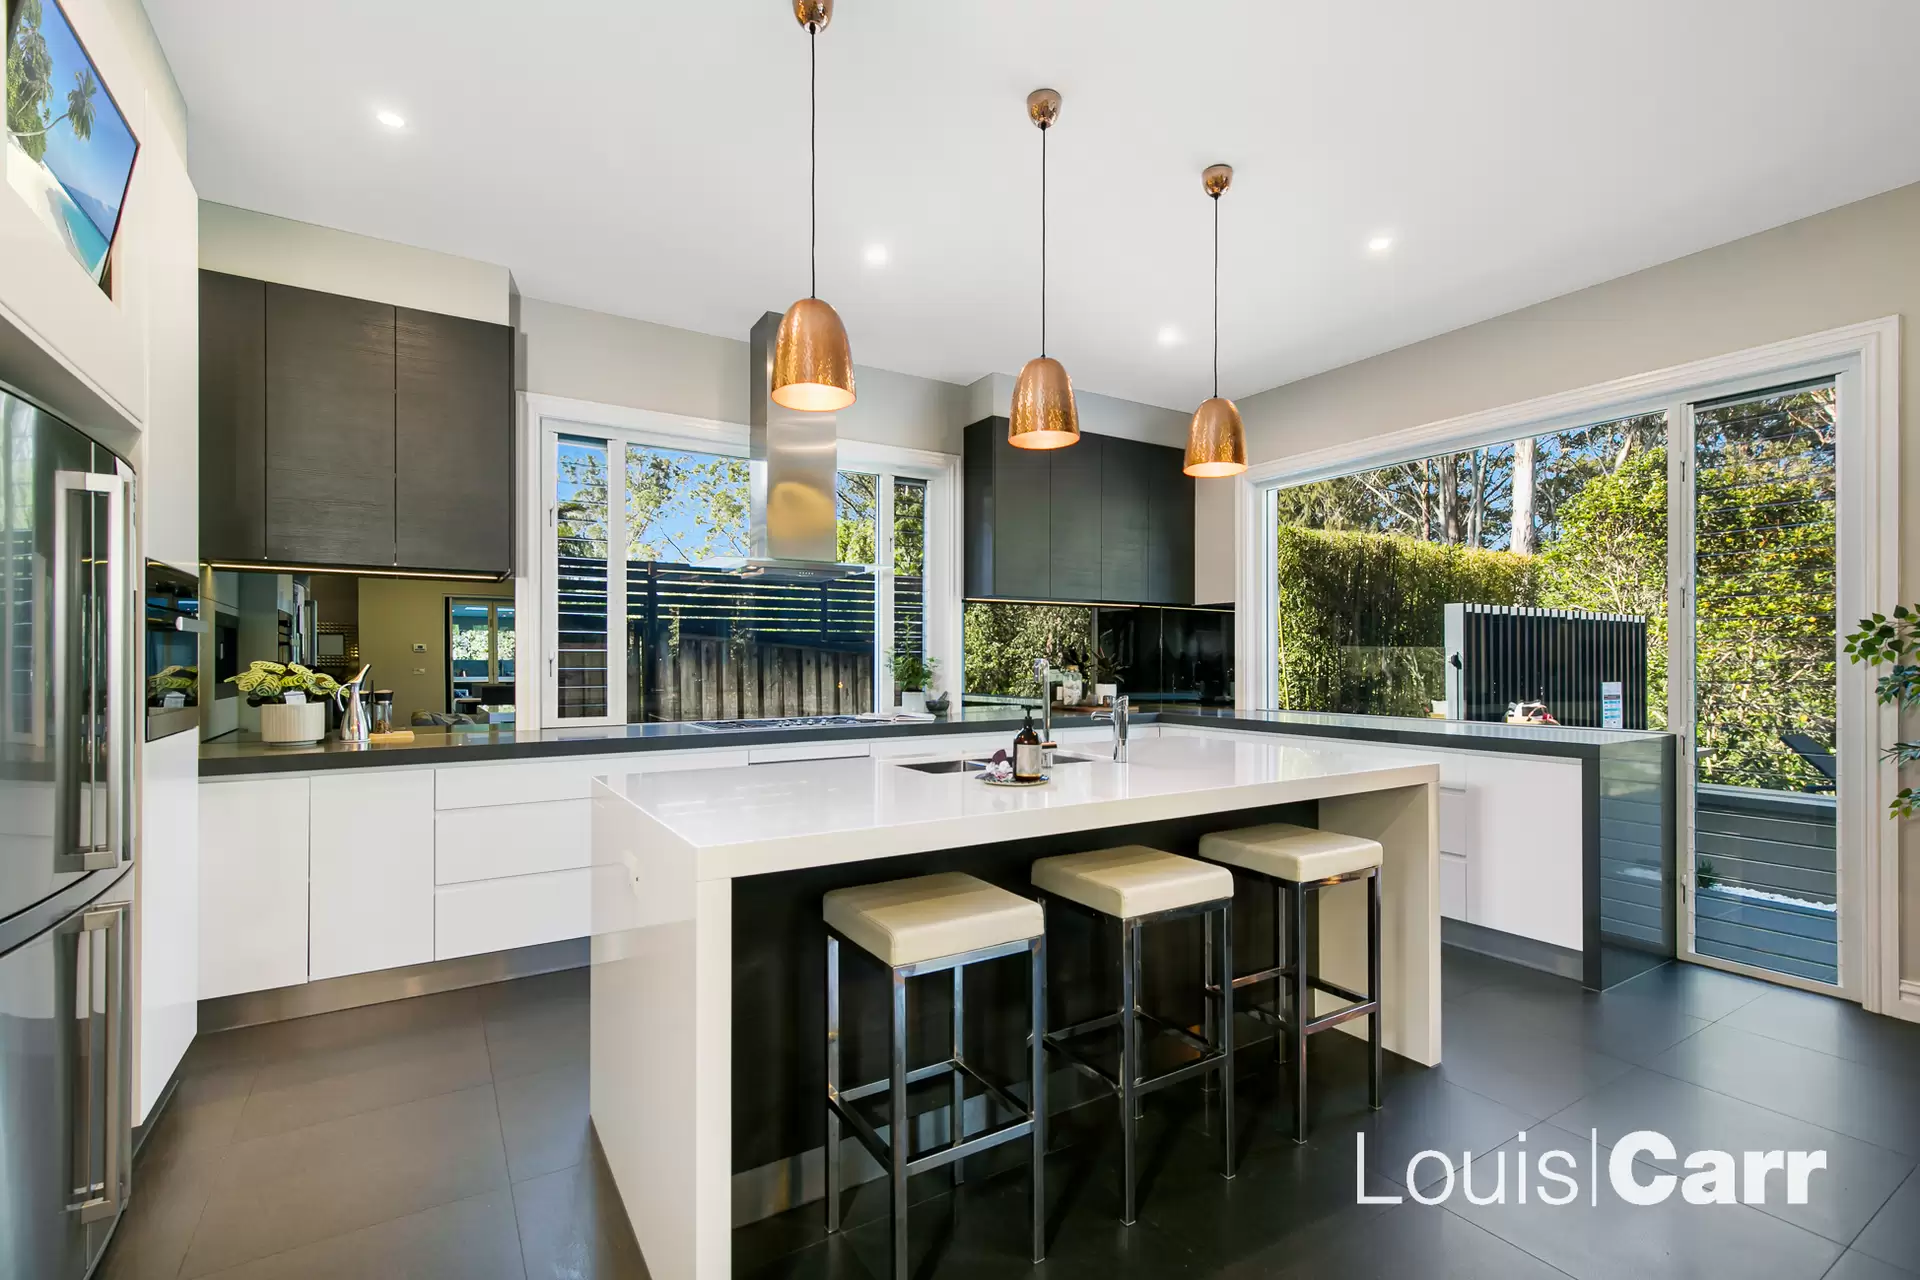 Photo #7: 10 Rodney Place, West Pennant Hills - Sold by Louis Carr Real Estate